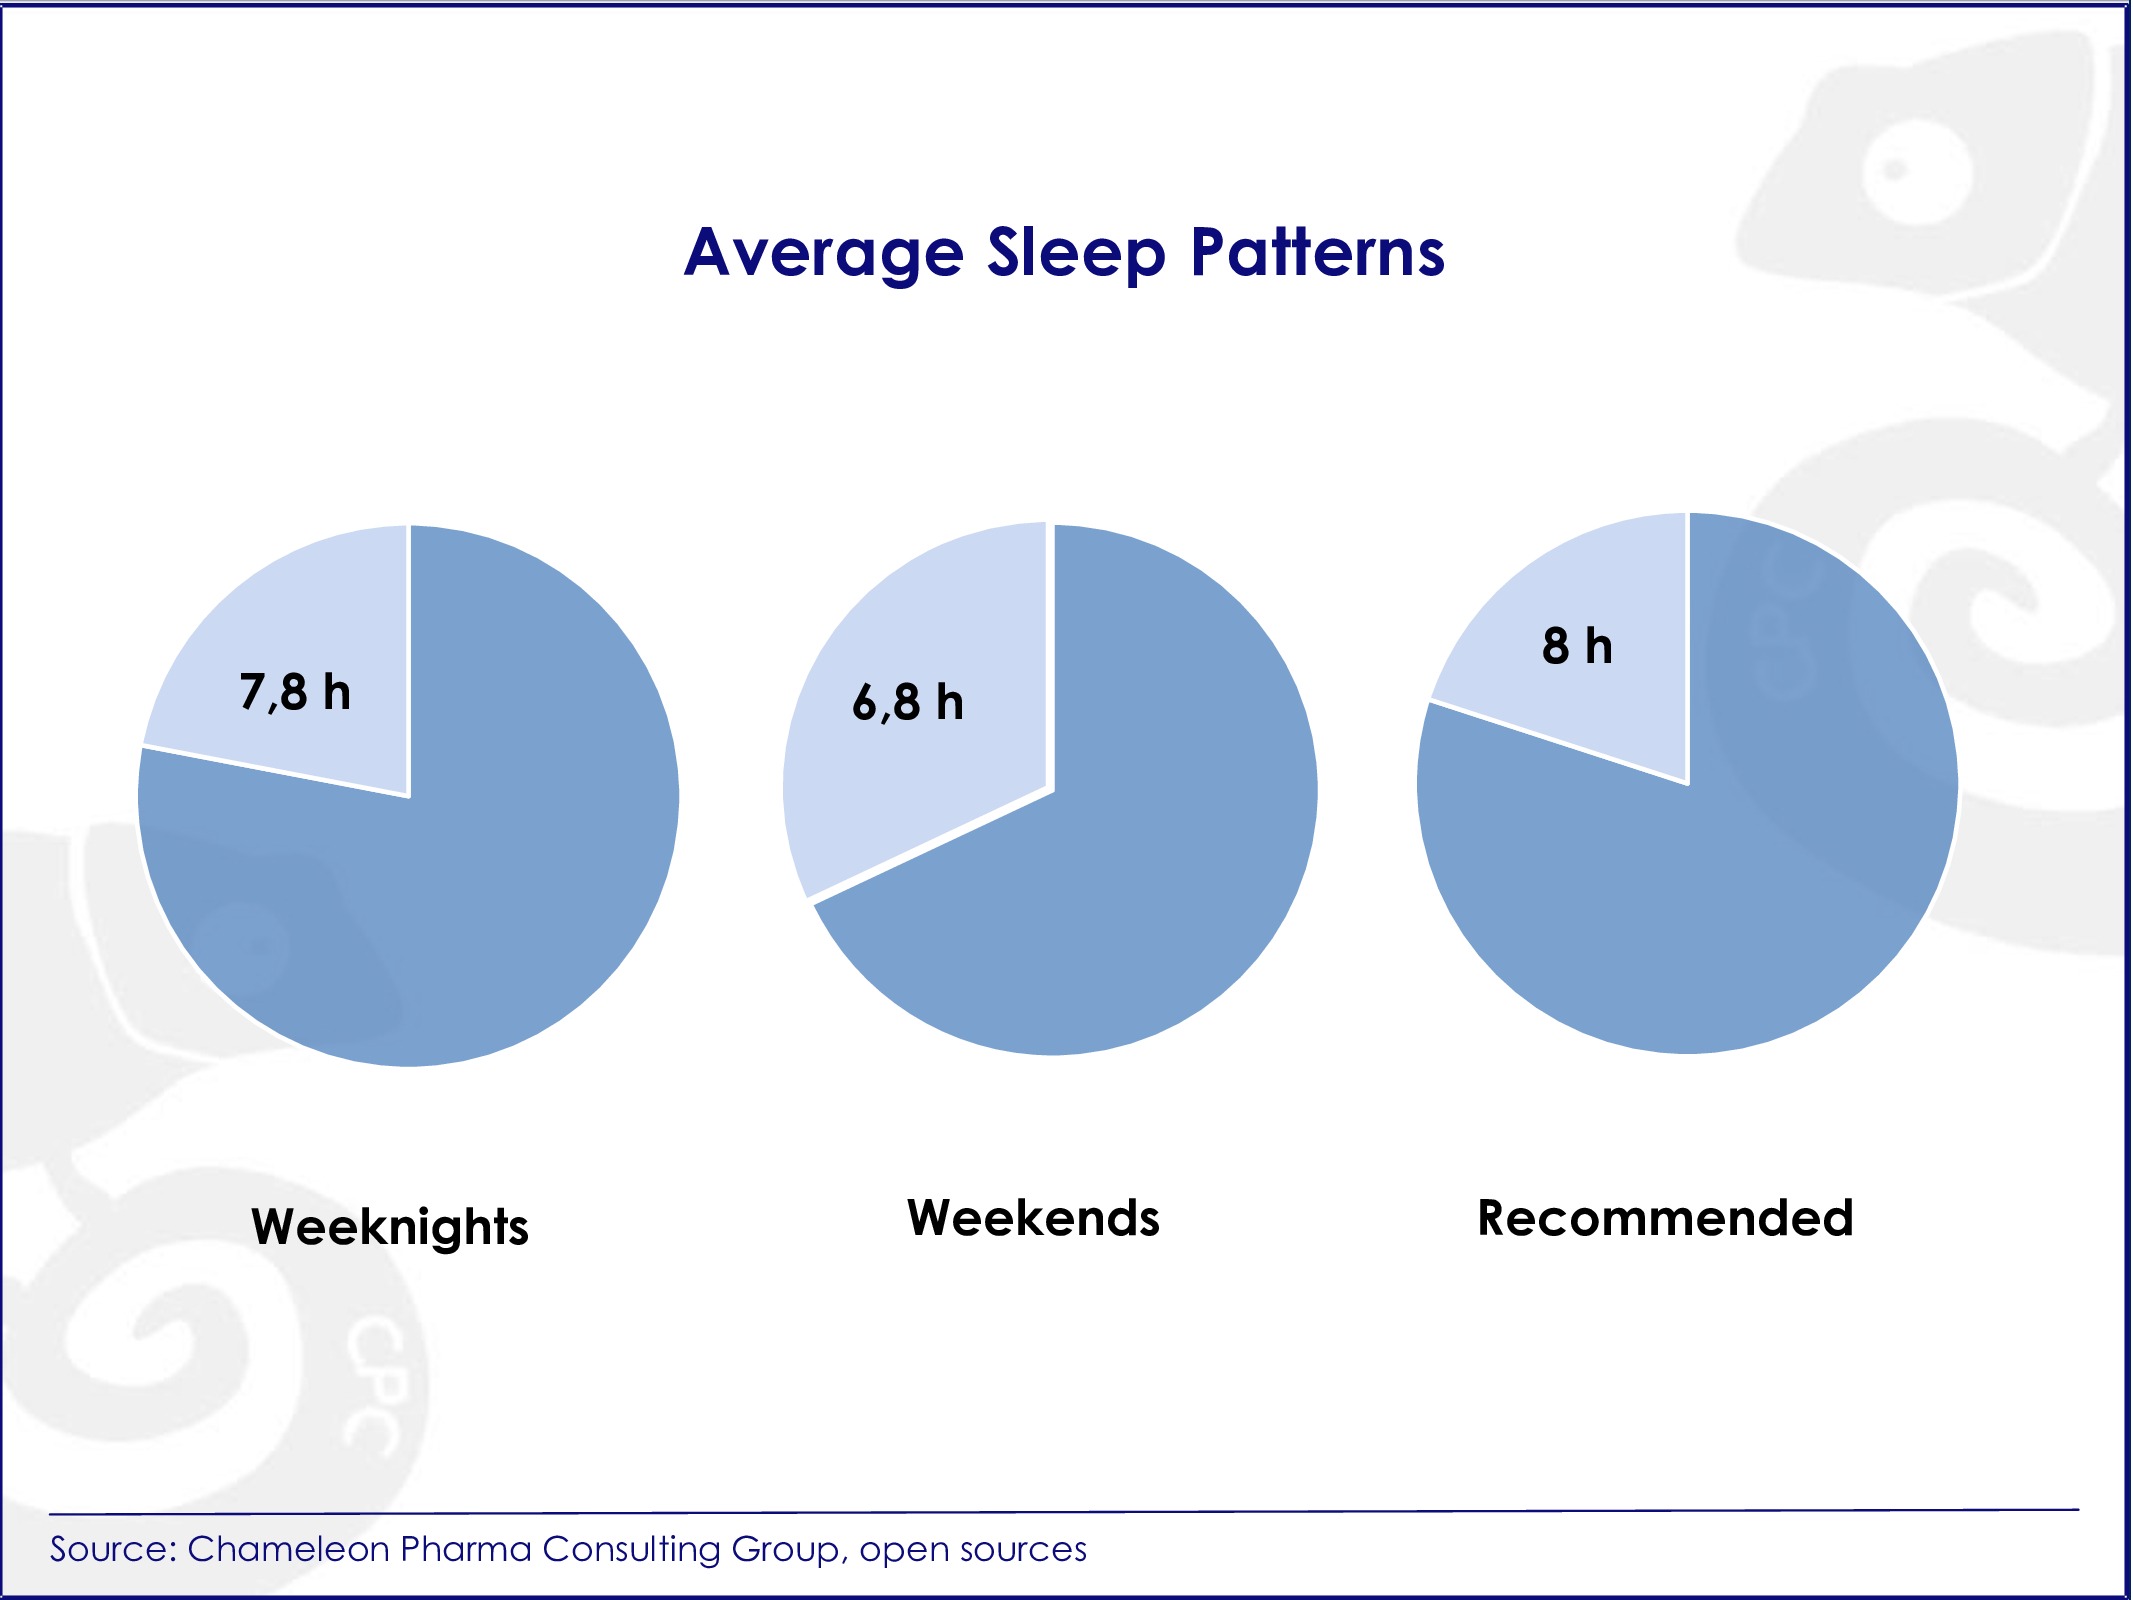 sleep aids market, CAGR, sleep deprivation, Rx drugs, Barbiturates, Tranquilizers, Asia-Pacific